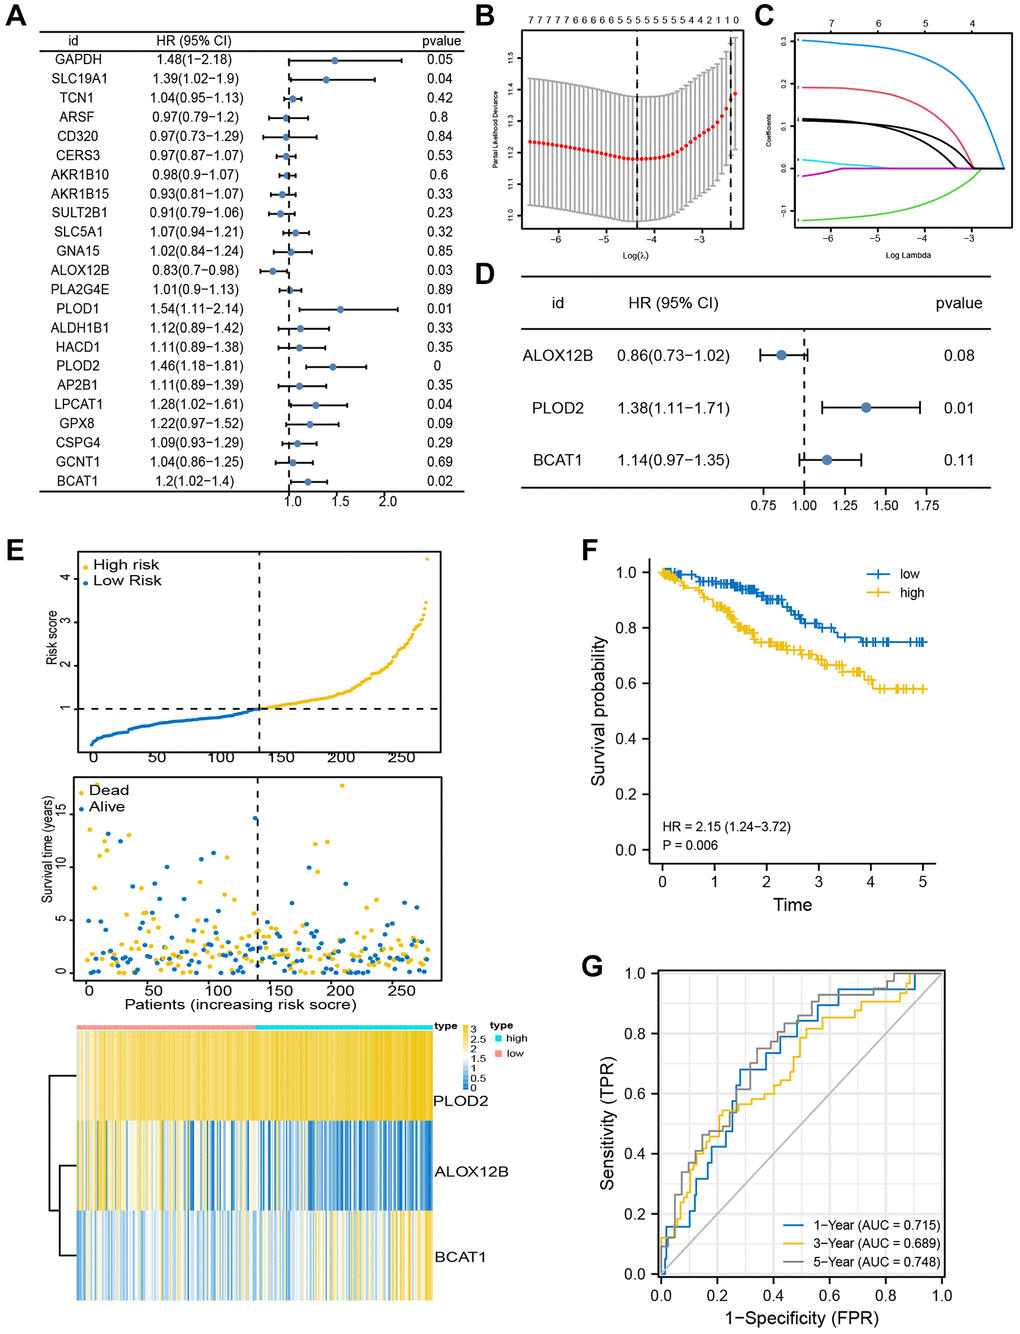 Identification of prognosis-related genes. (A) Univariate Cox analysis was used to double-screen the prognosis-related genes in the screened gene set. (B) Parameter selection in lasso model is 100 times cross validation. (C) Lasso coefficient spectrum of prognostic gene screening. (D) Stepwise Cox proportional hazards regression model was used to further screen the prognosis-related genes. (E) Risk score distribution, survival status, and gene expression profile. (F, G) K-M survival plot and ROC analysis for predicting 1-year, 3-year and 5-year prognosis.